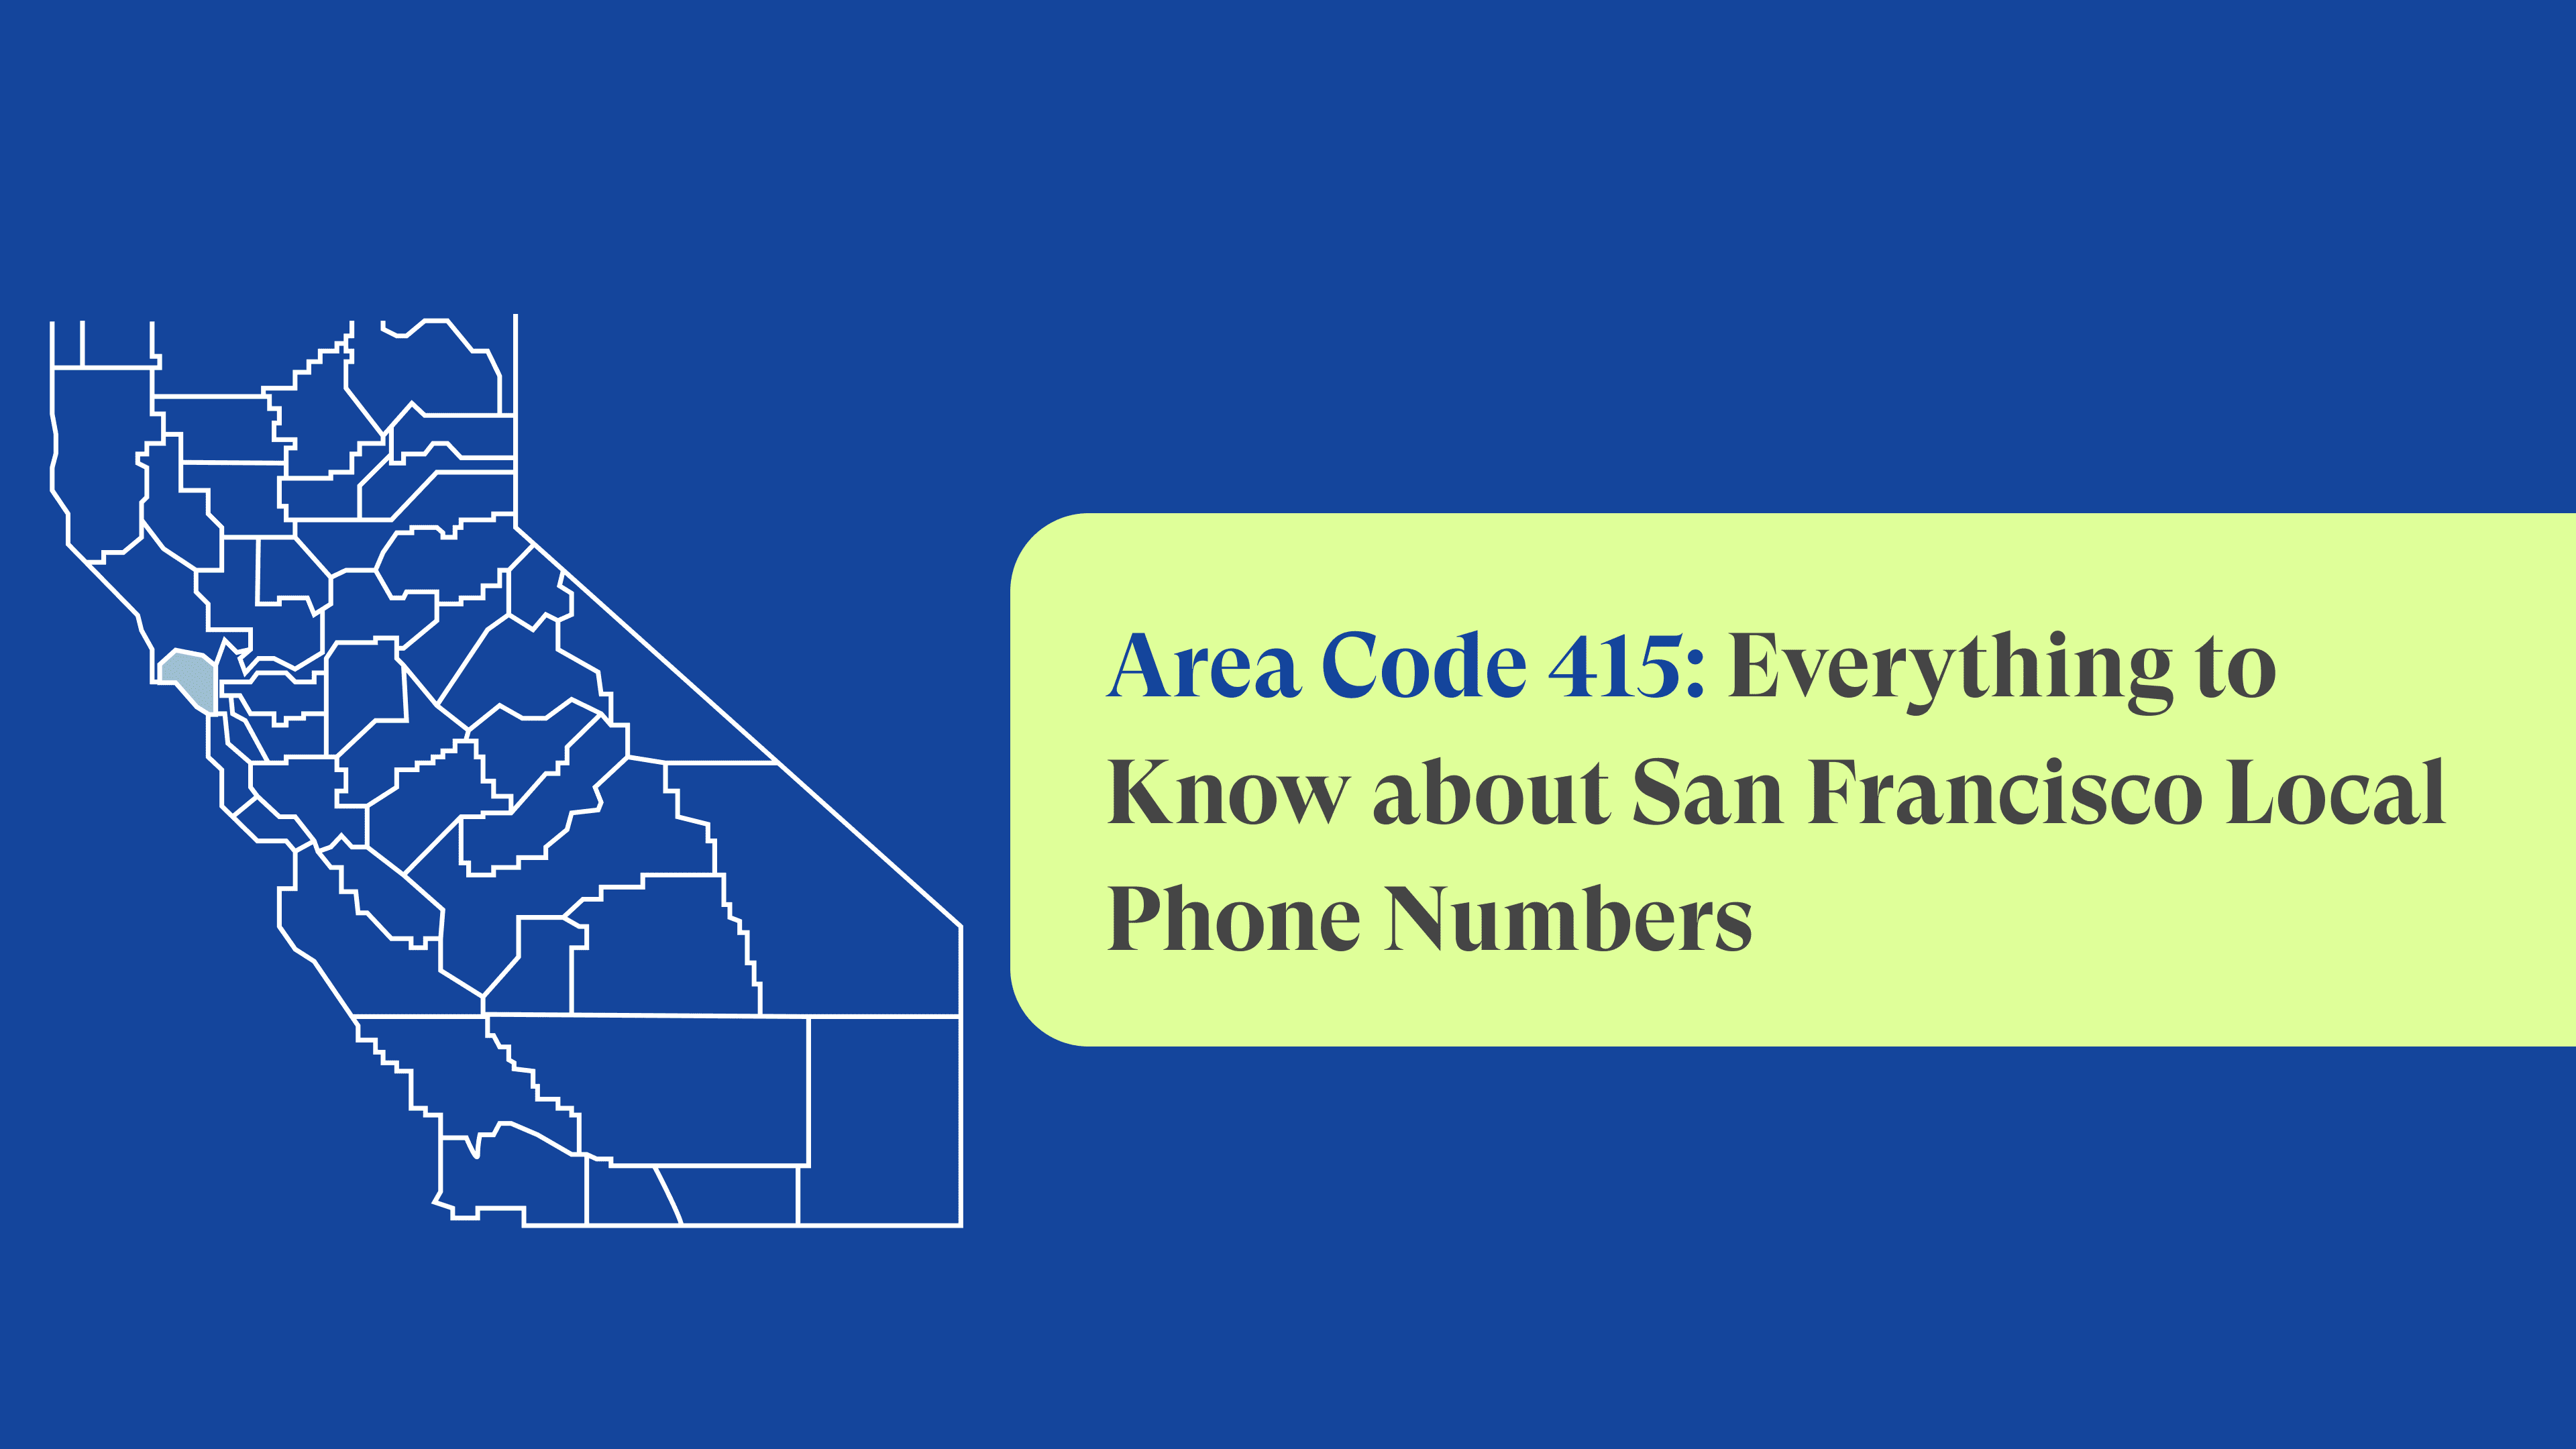 Area Code 415: San Francisco Local Phone Numbers